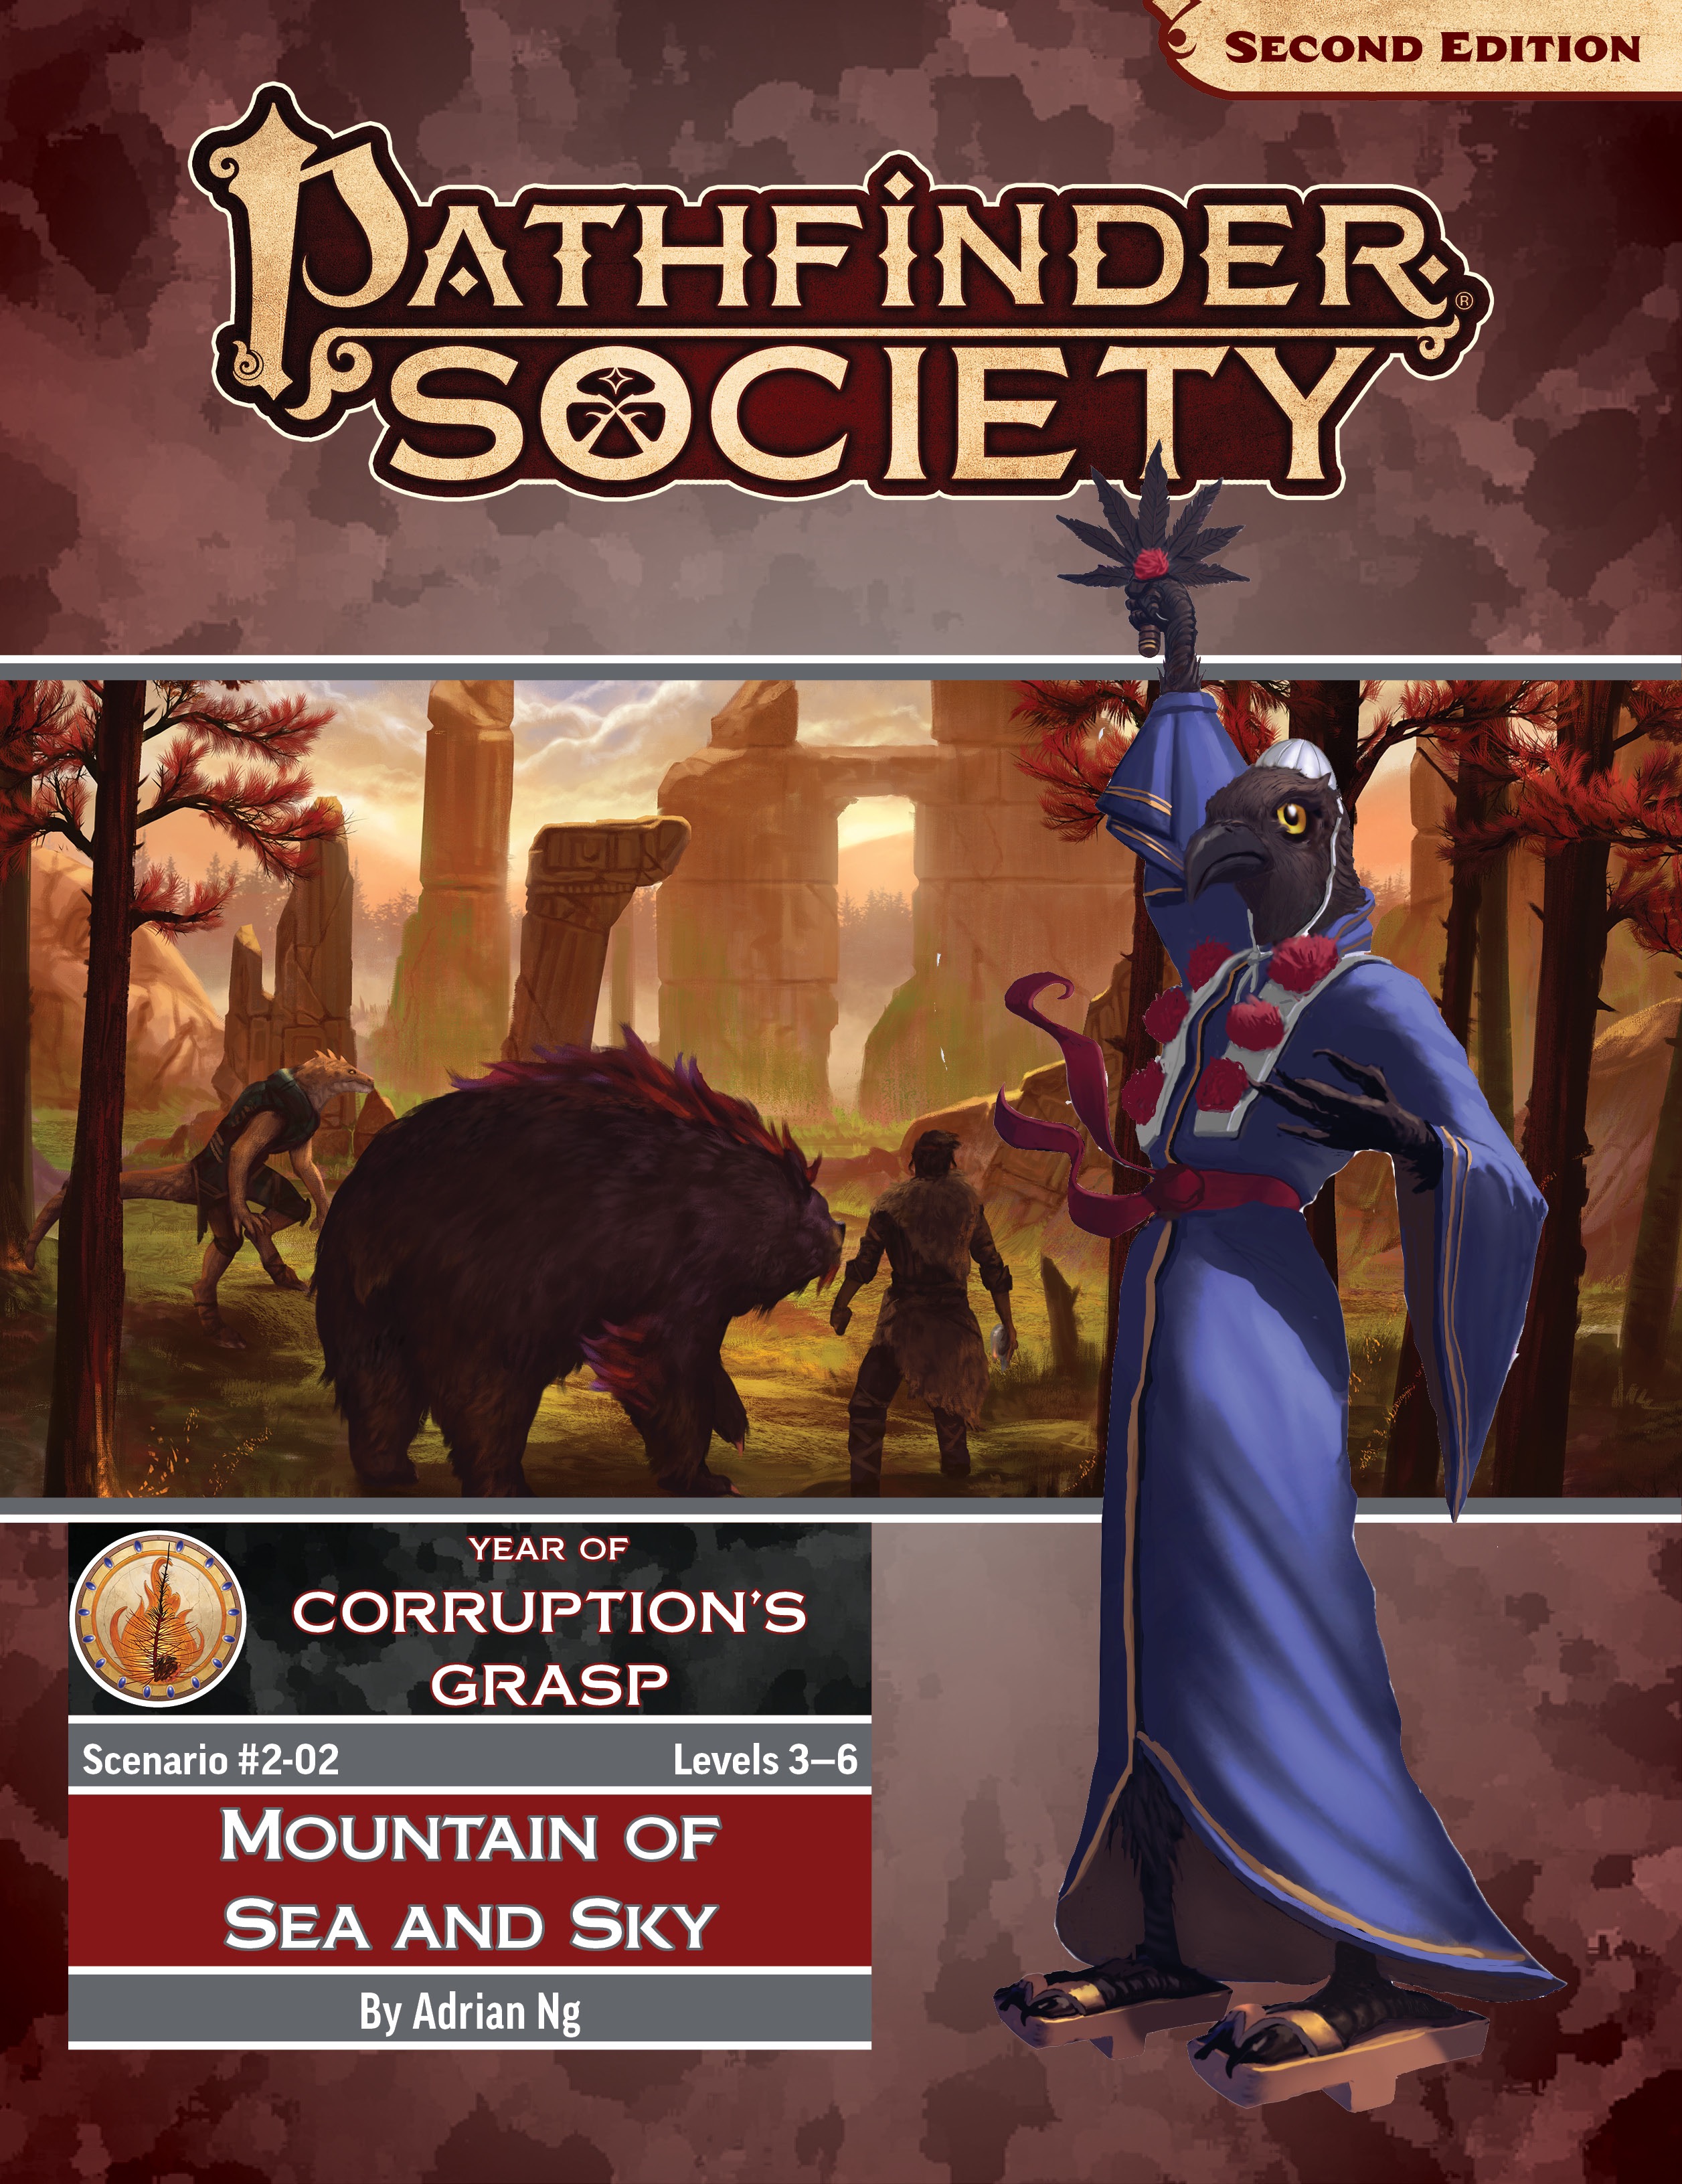 Pathfinder Society: Year of Corruption's Grasp. An image of blue robed tengu over the top of an illustration of ruins in a red forest